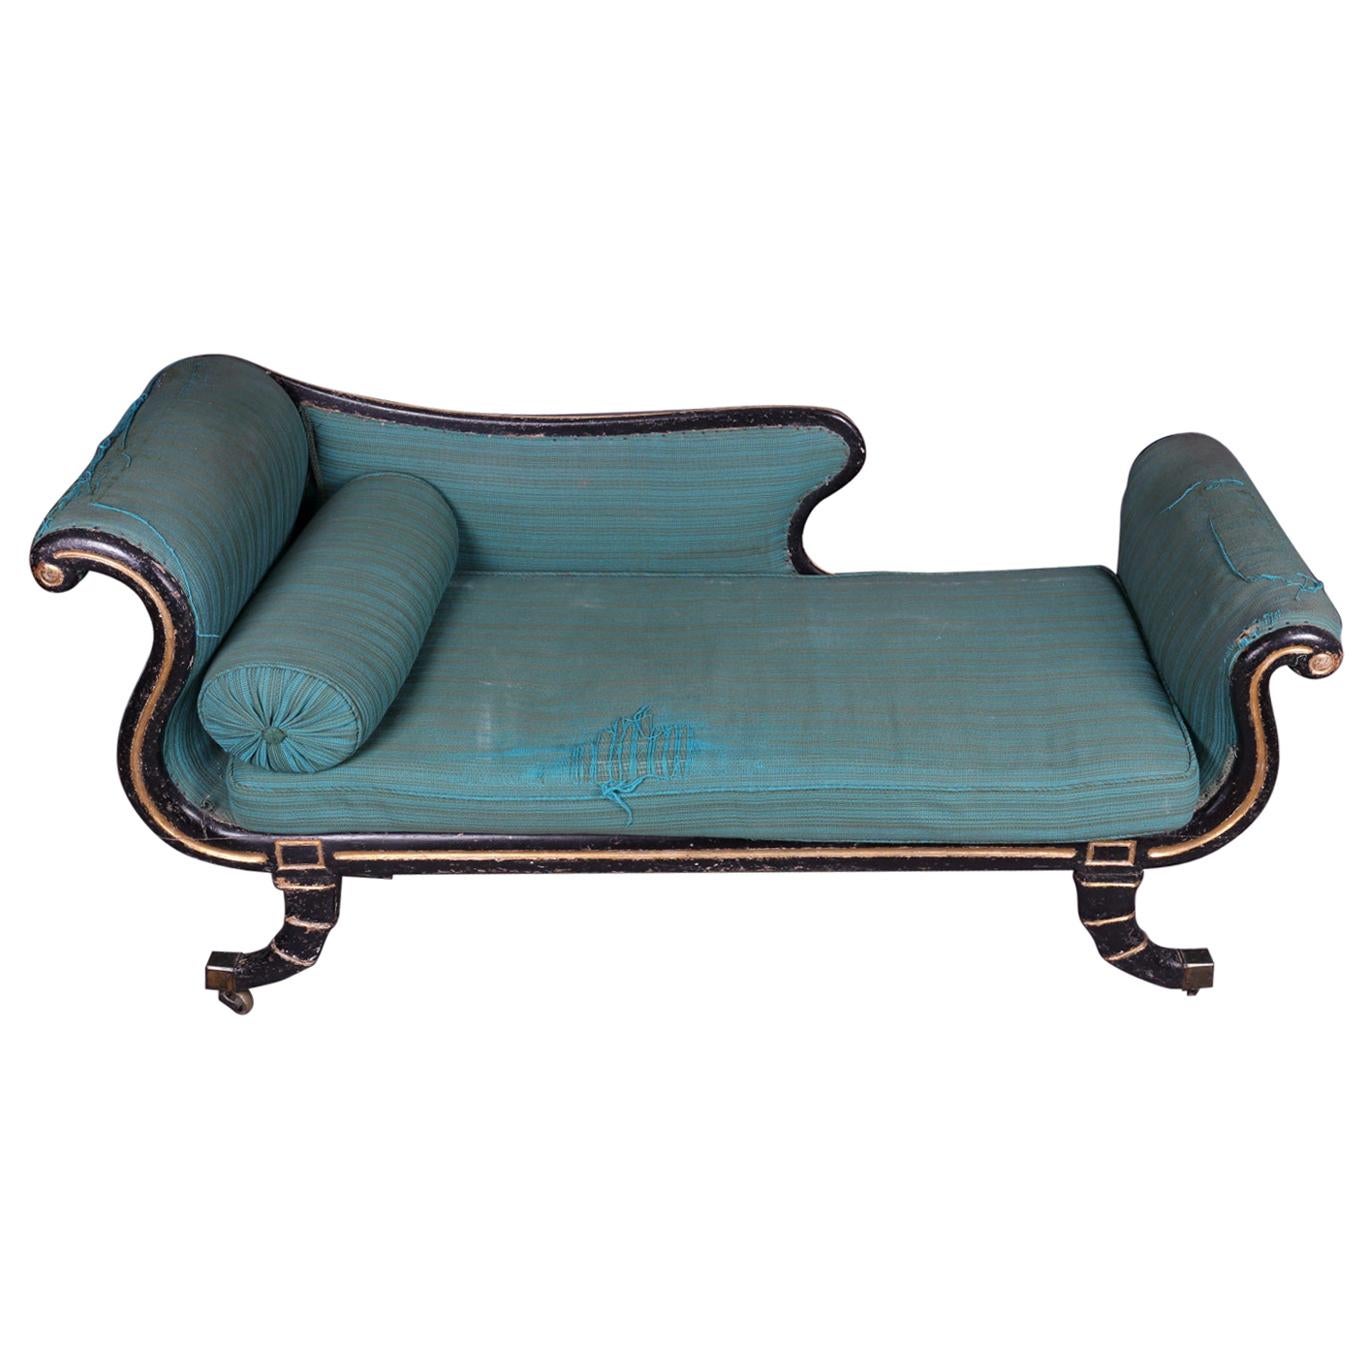 Chaise Longue/Daybed - Regency Period - Bergère  For Sale